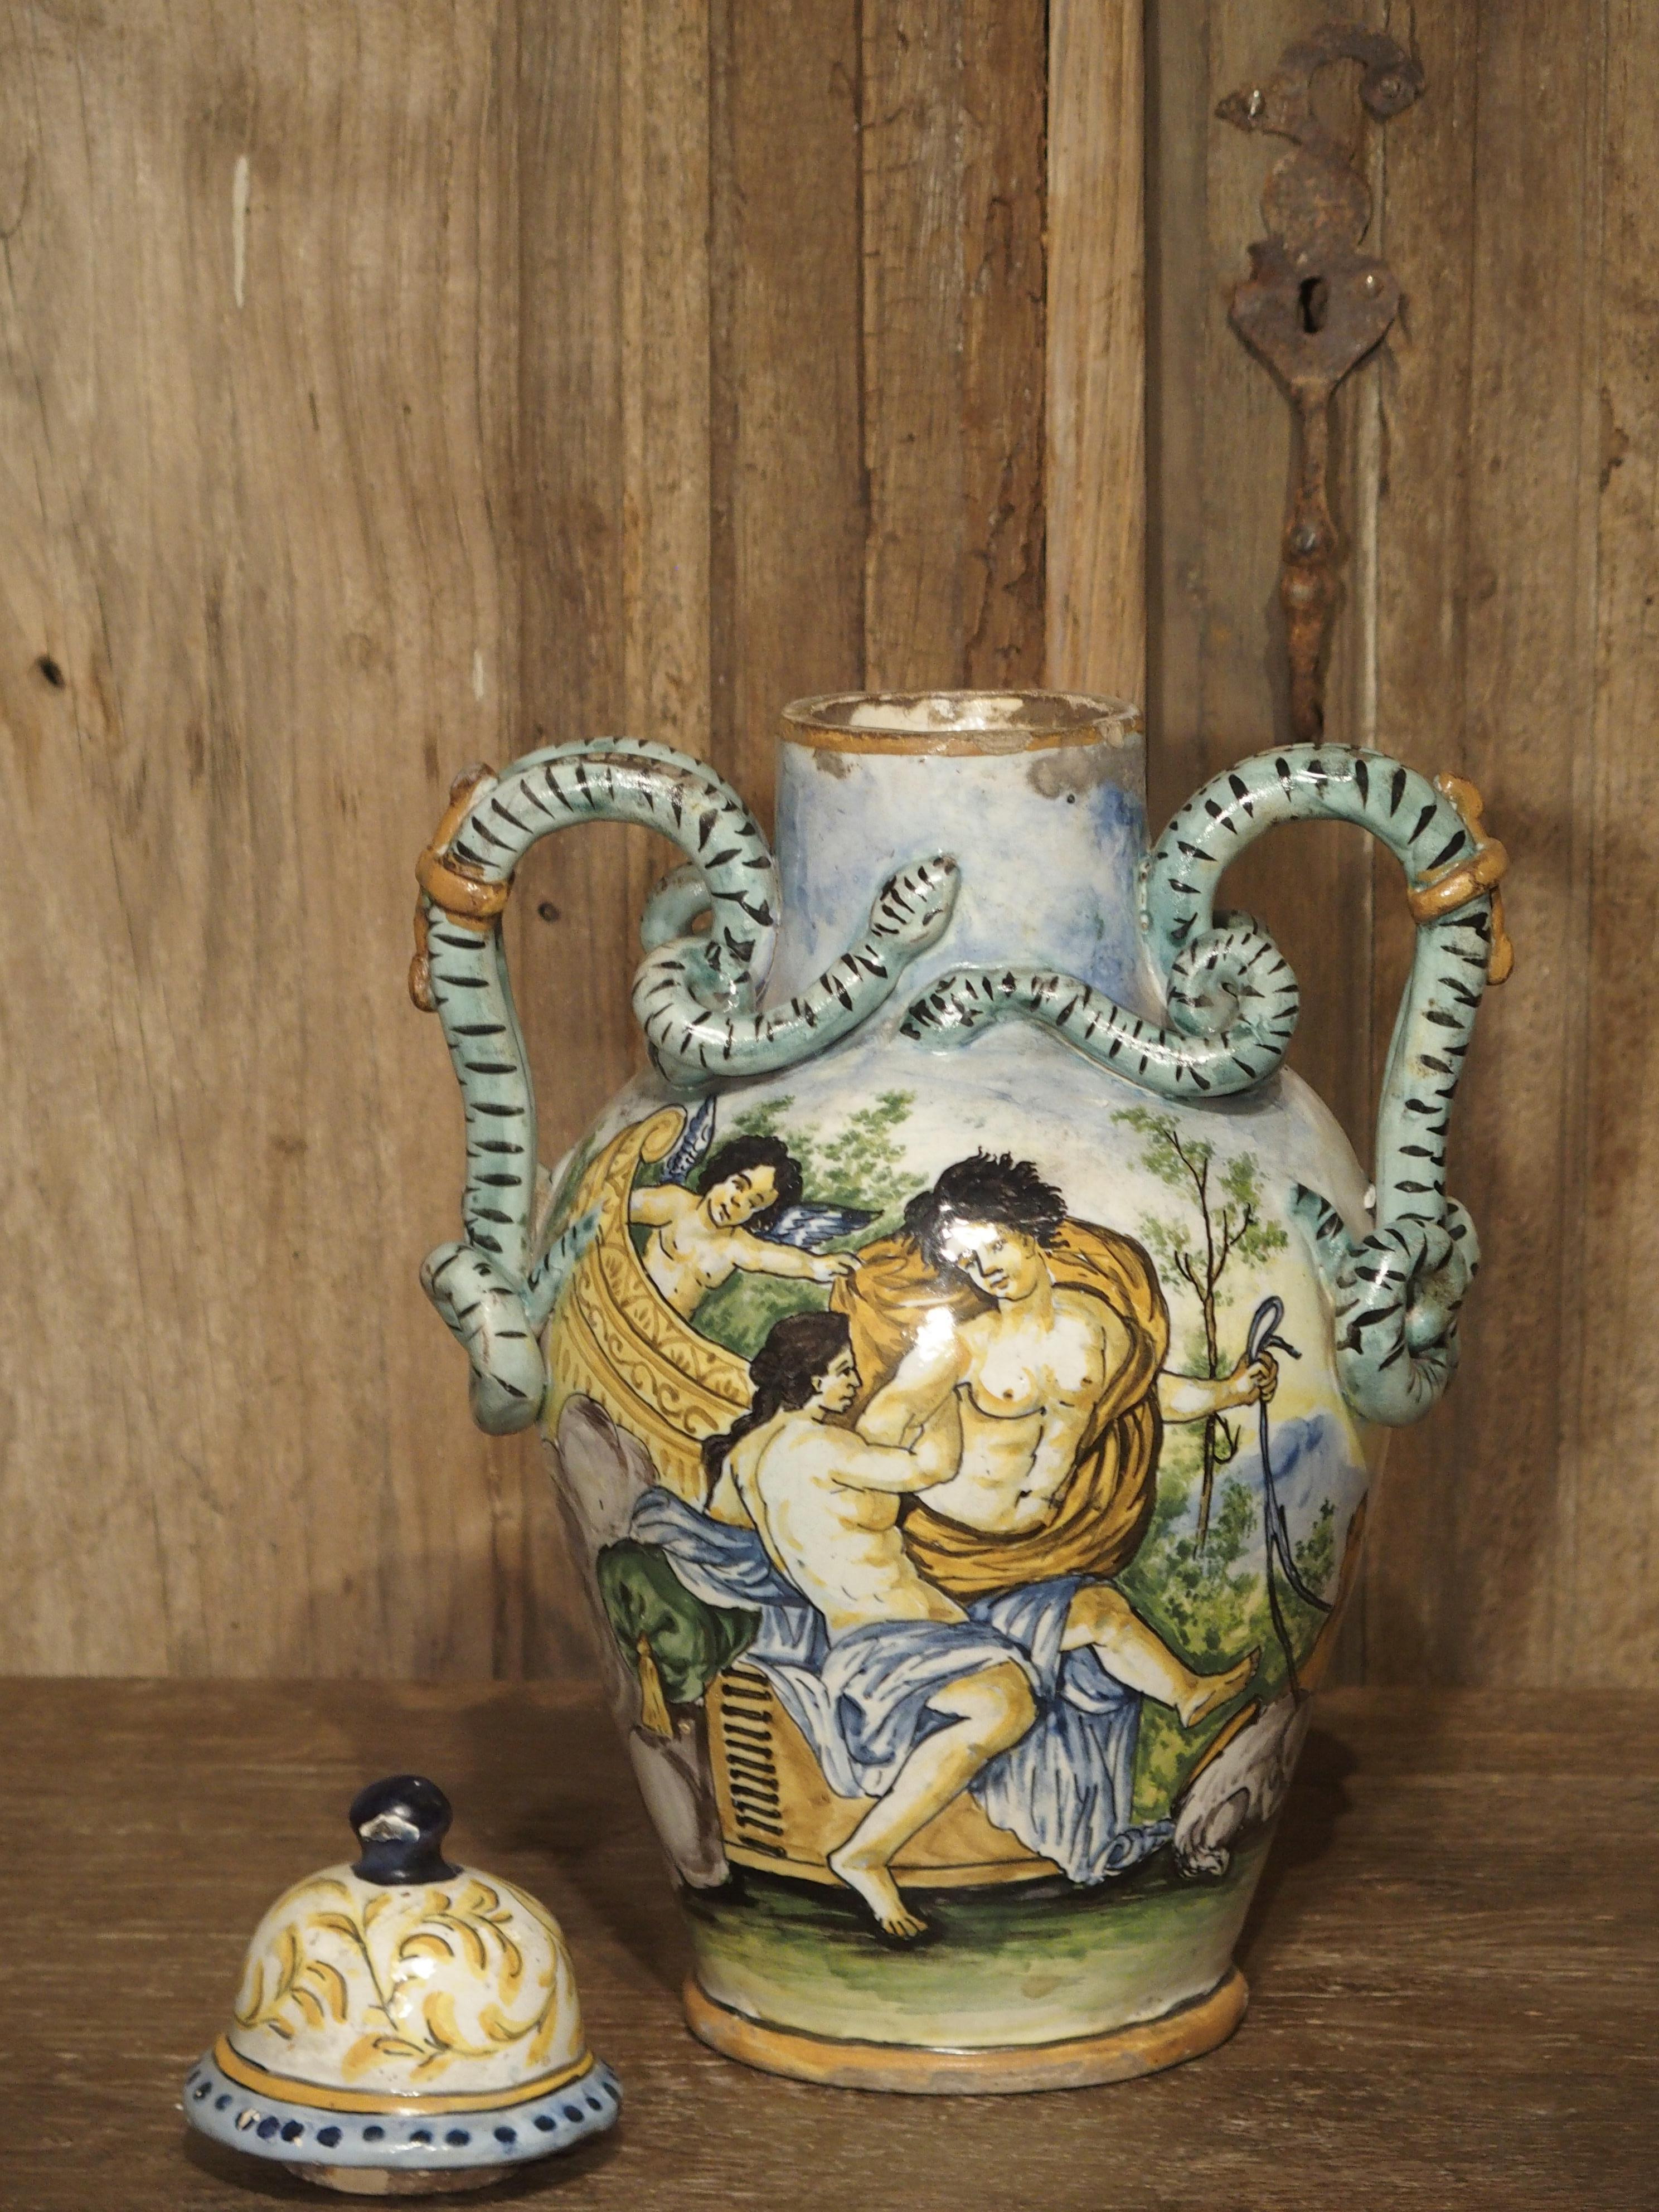 Antique Hand Painted Majolica Vase from Umbria, circa 1870 For Sale 1